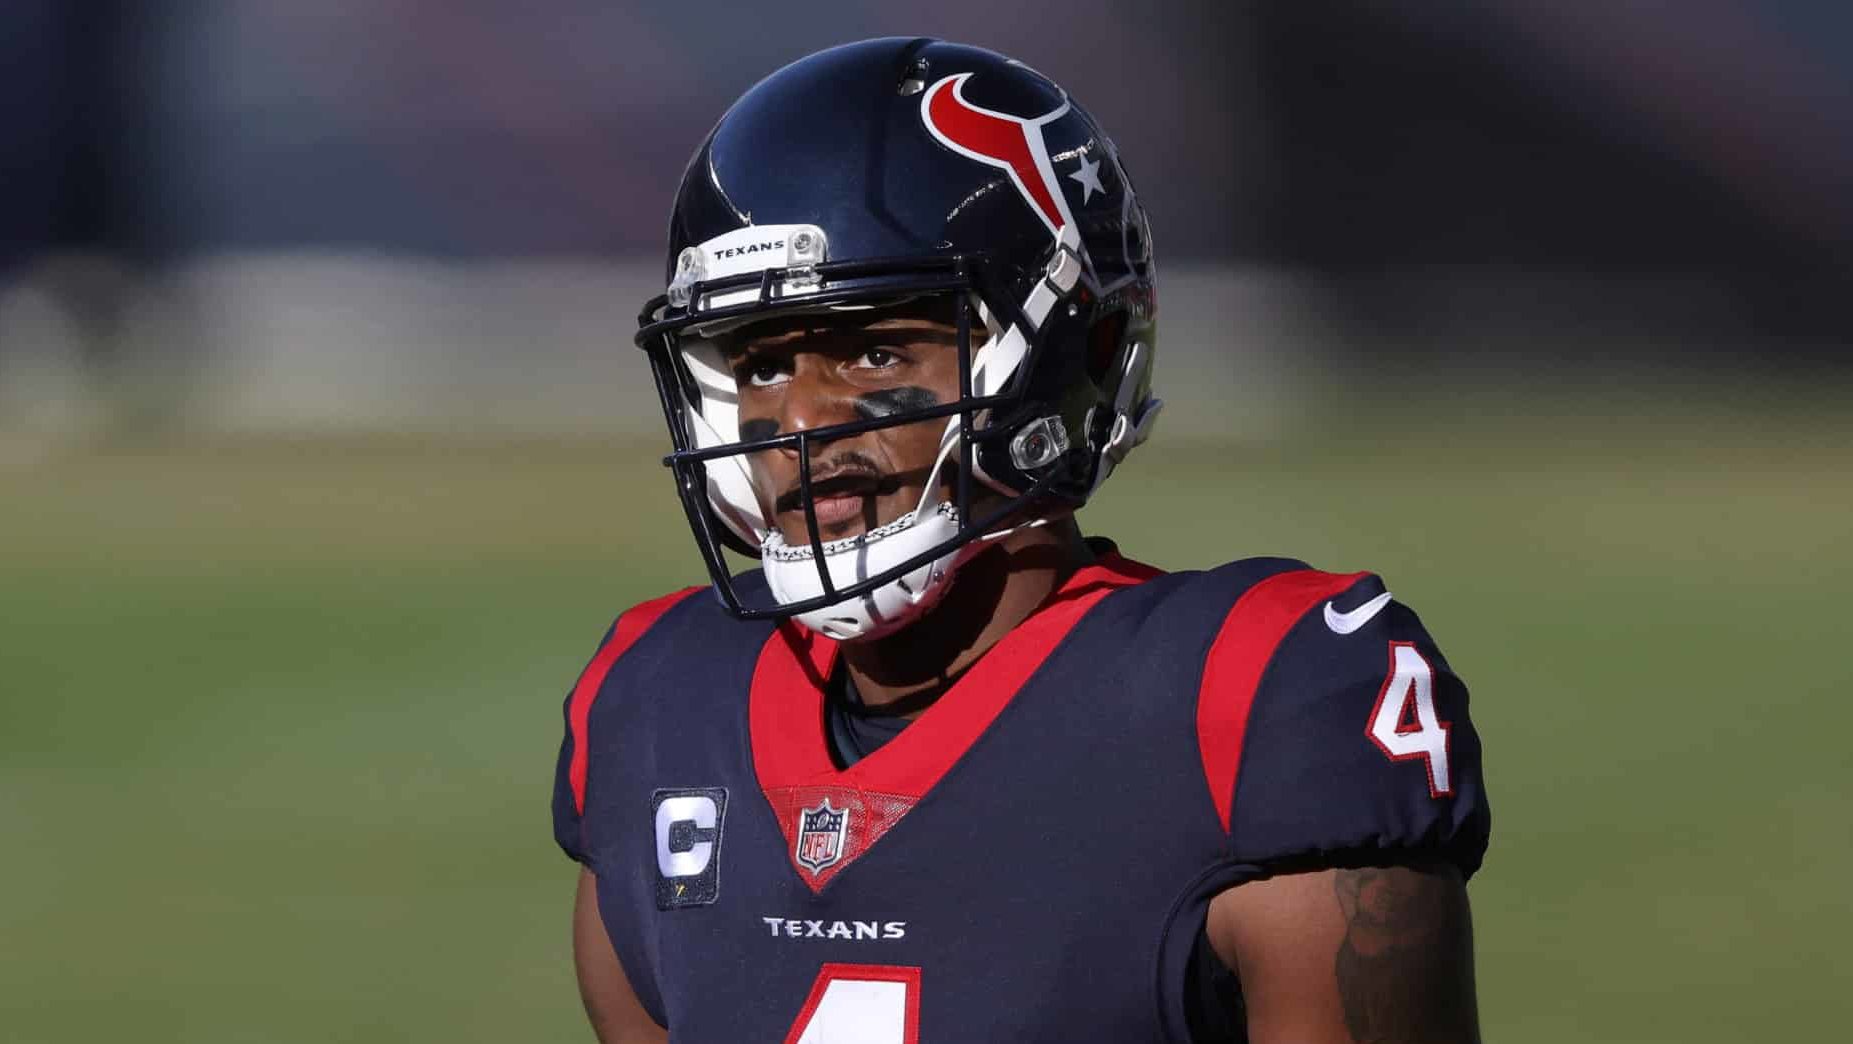 CHICAGO, IL - DECEMBER 13: Houston Texans quarterback Deshaun Watson (4) looks on in action during a game between the Chicago Bears and the Houston Texans on December 13, 2020, at Soldier Field in Chicago, IL.